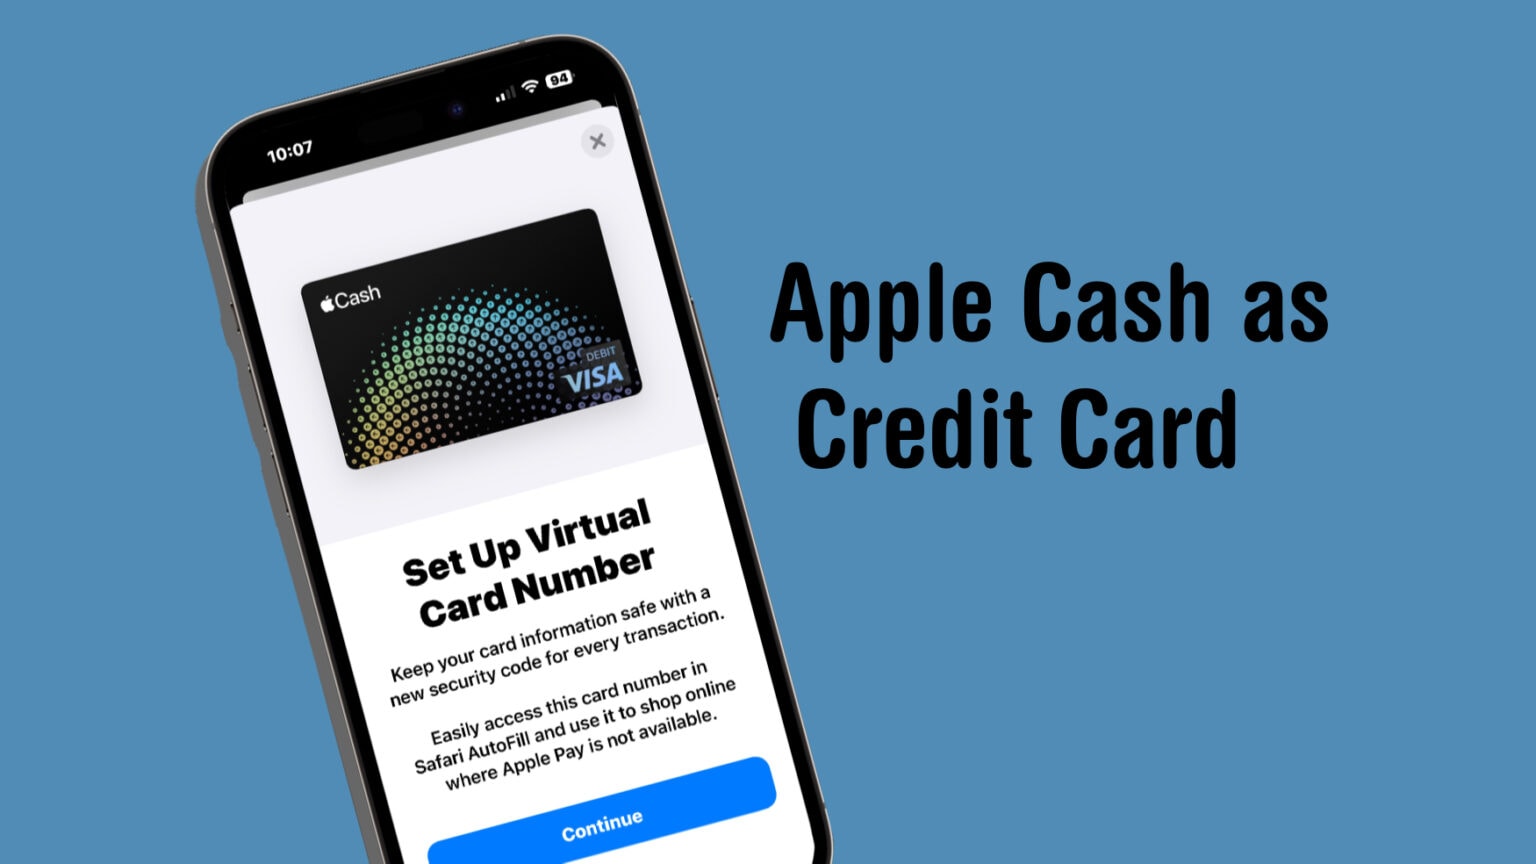 Shopping online with Apple Cash is about to get a whole lot easier